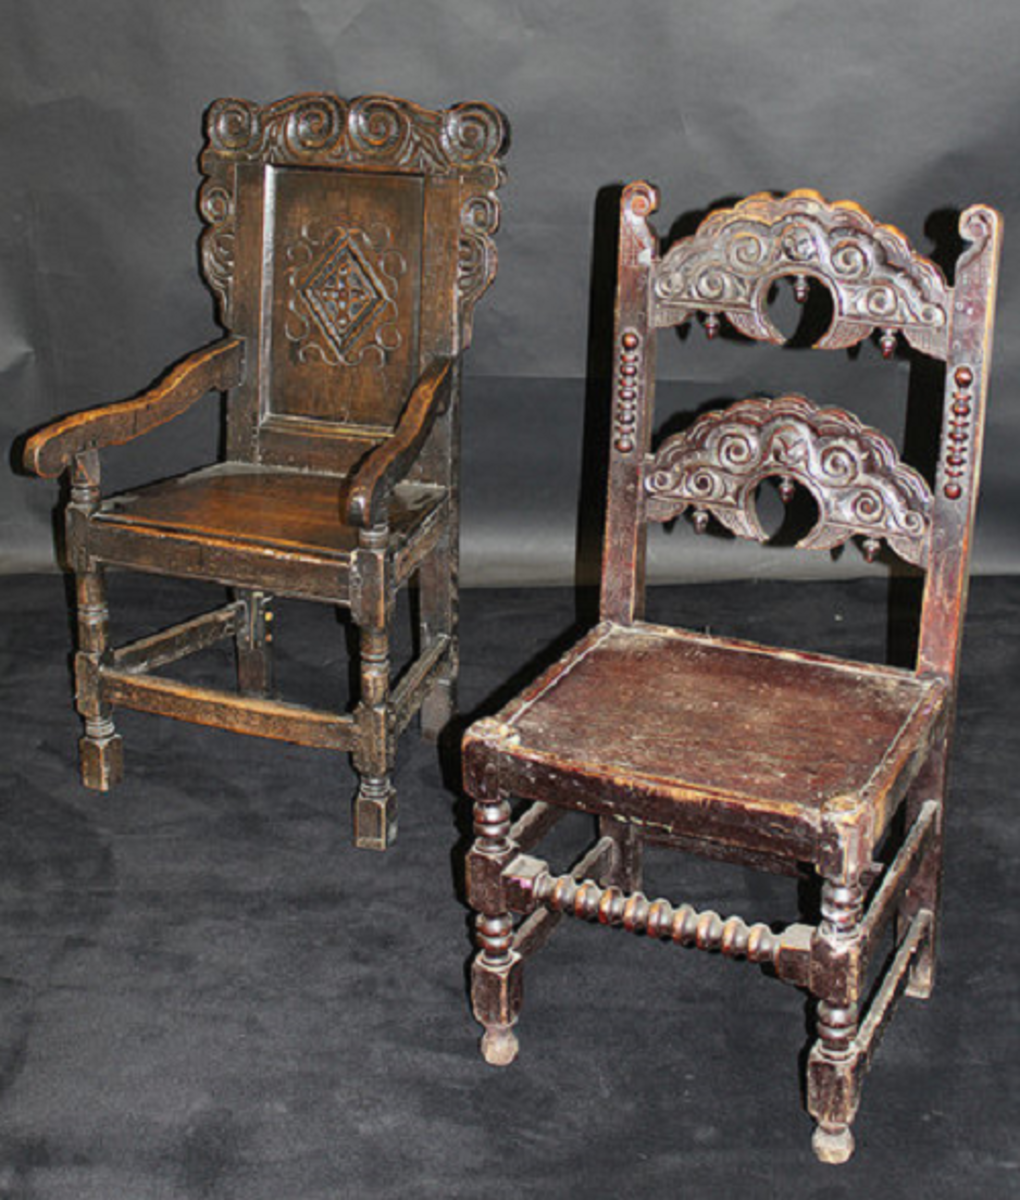 Early American Furniture in 17th Century Colonial Days ...
